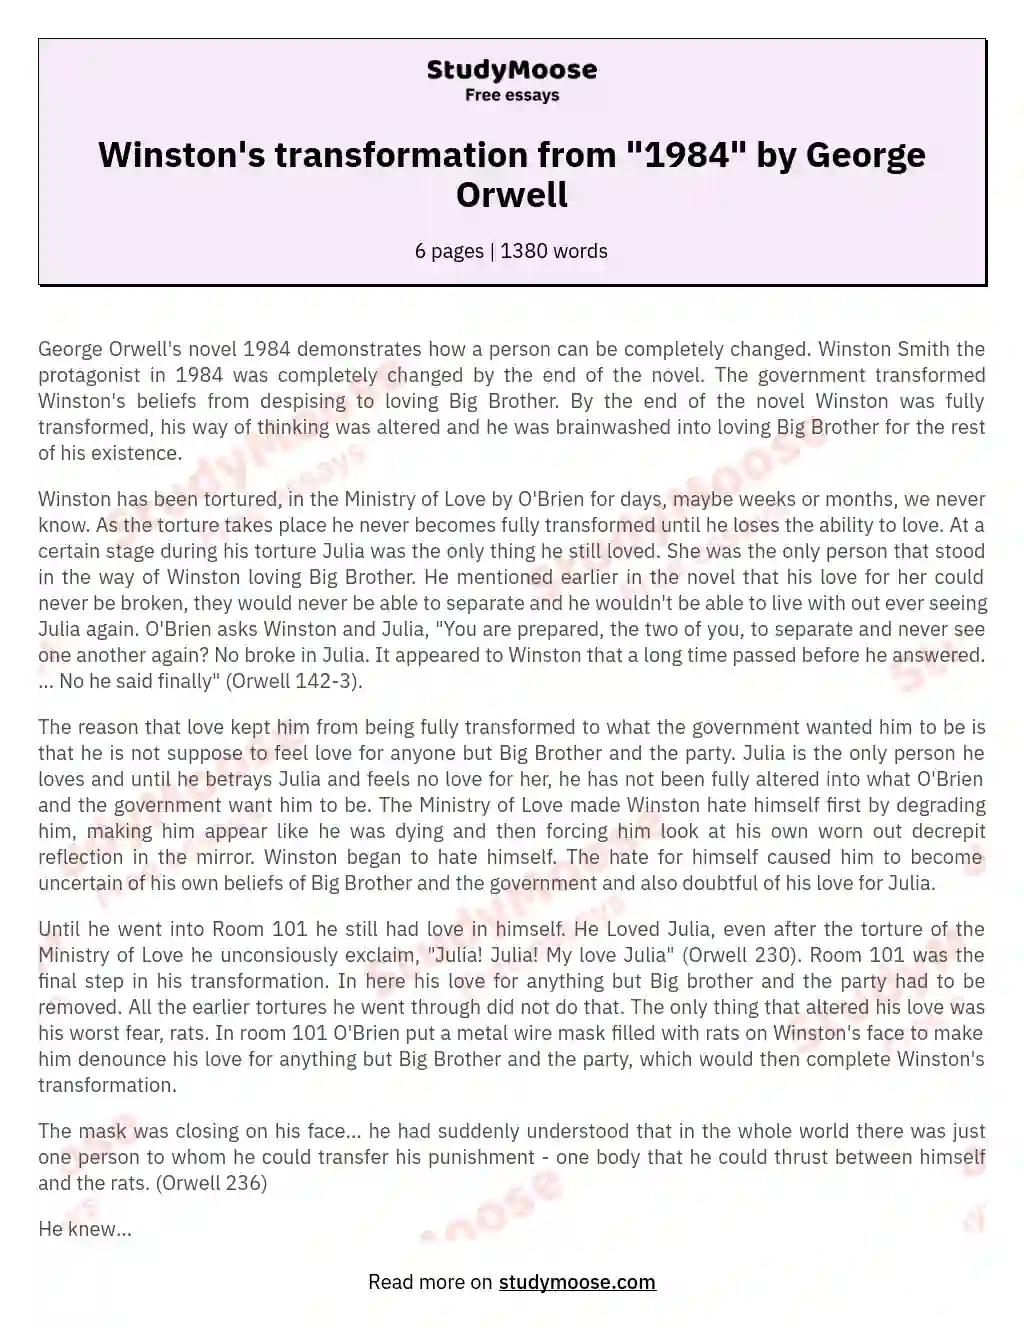 Winston's transformation from "1984" by George Orwell essay